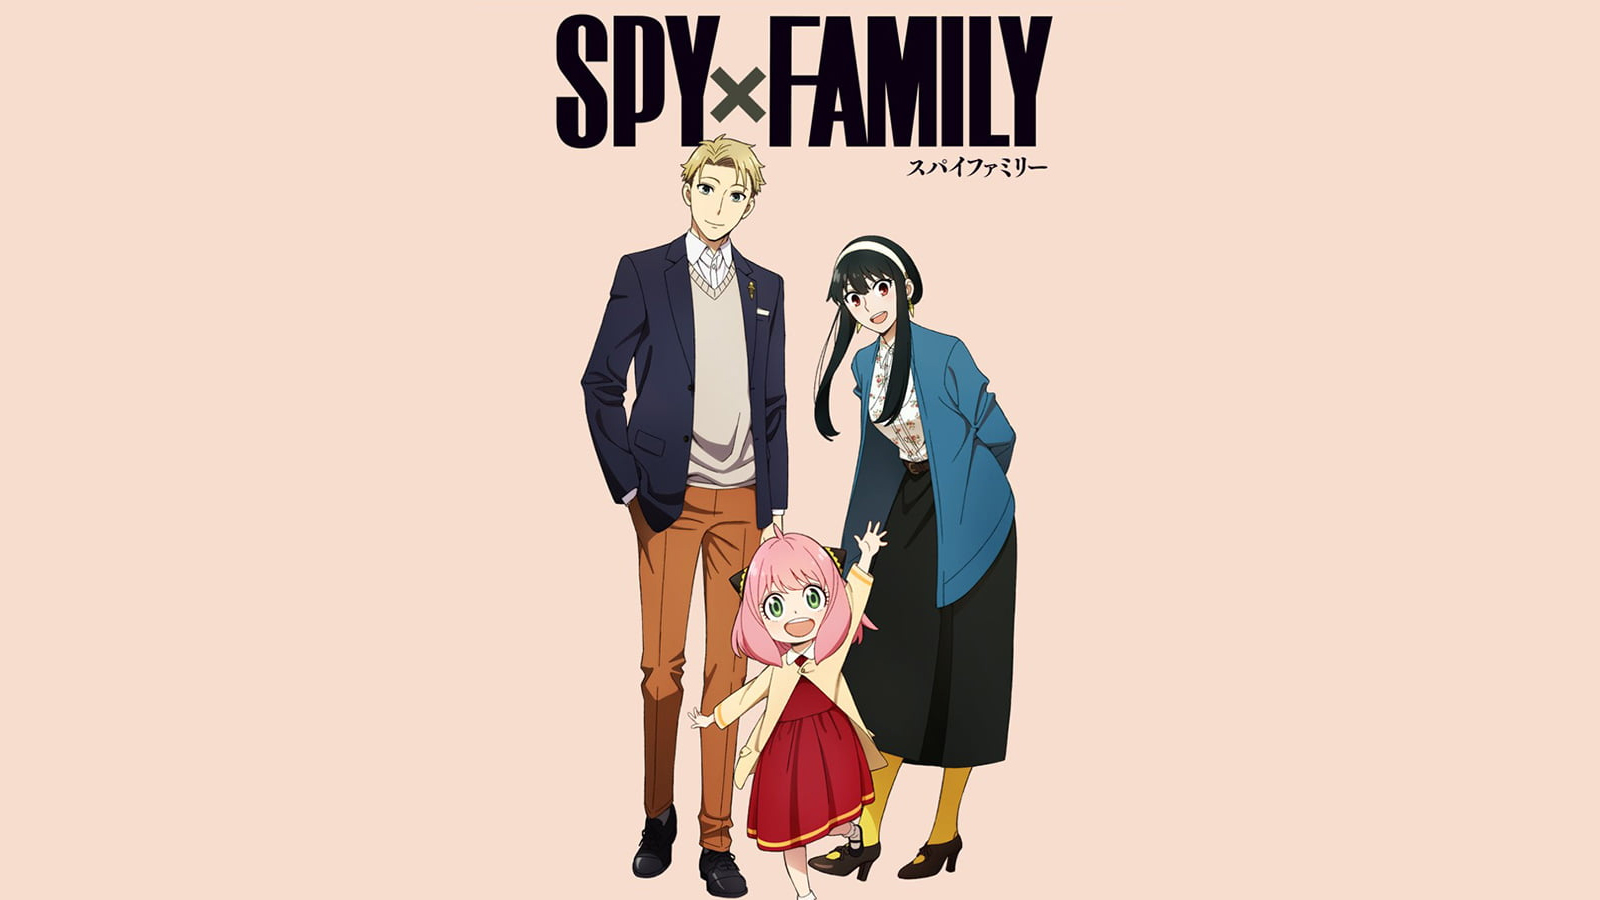 Spy x Family: Where to Watch and Stream Online